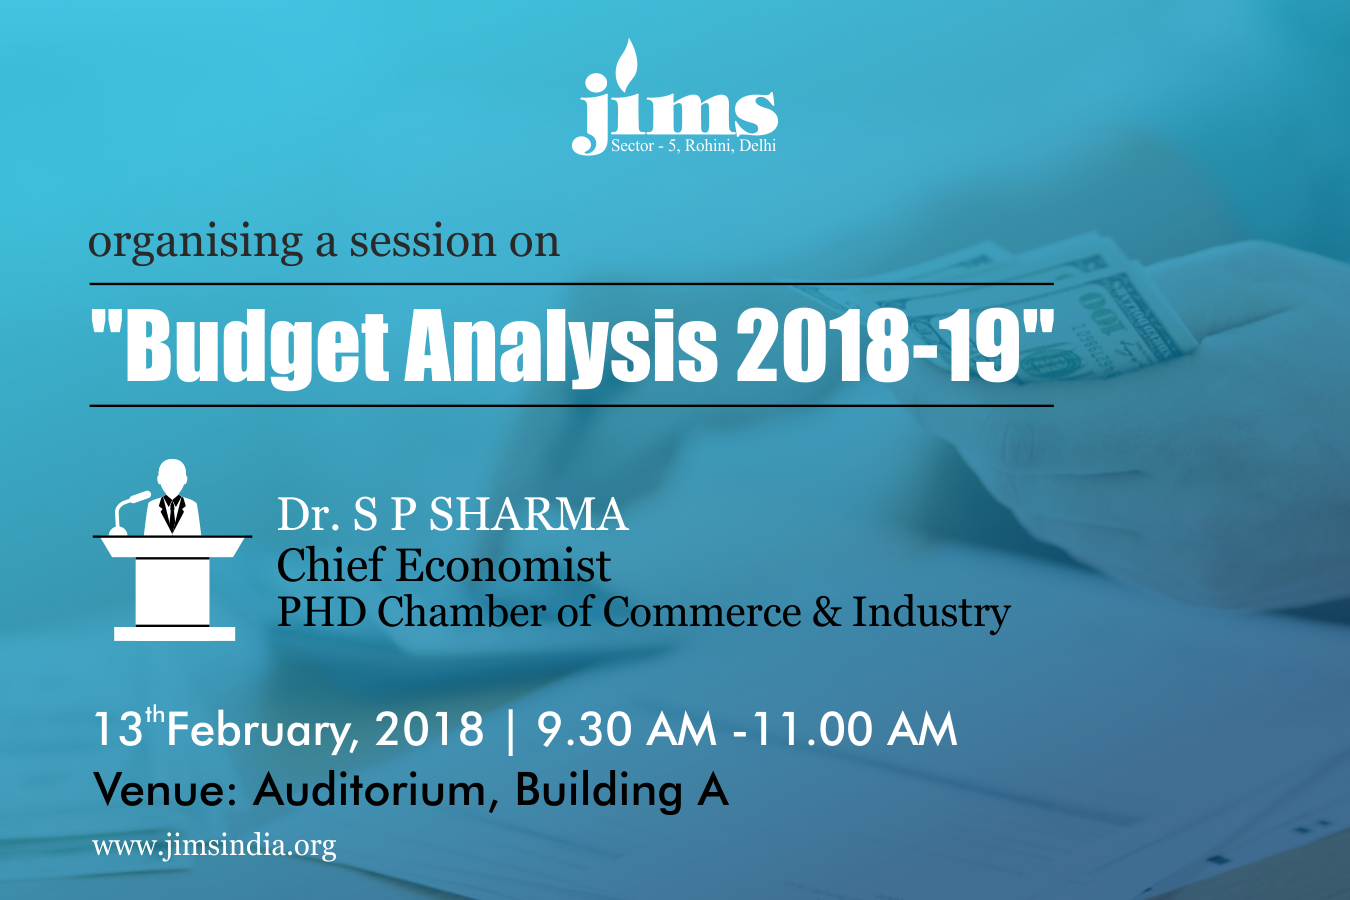 A Session on Budget Analysis 2018-19 at JIMS Rohini